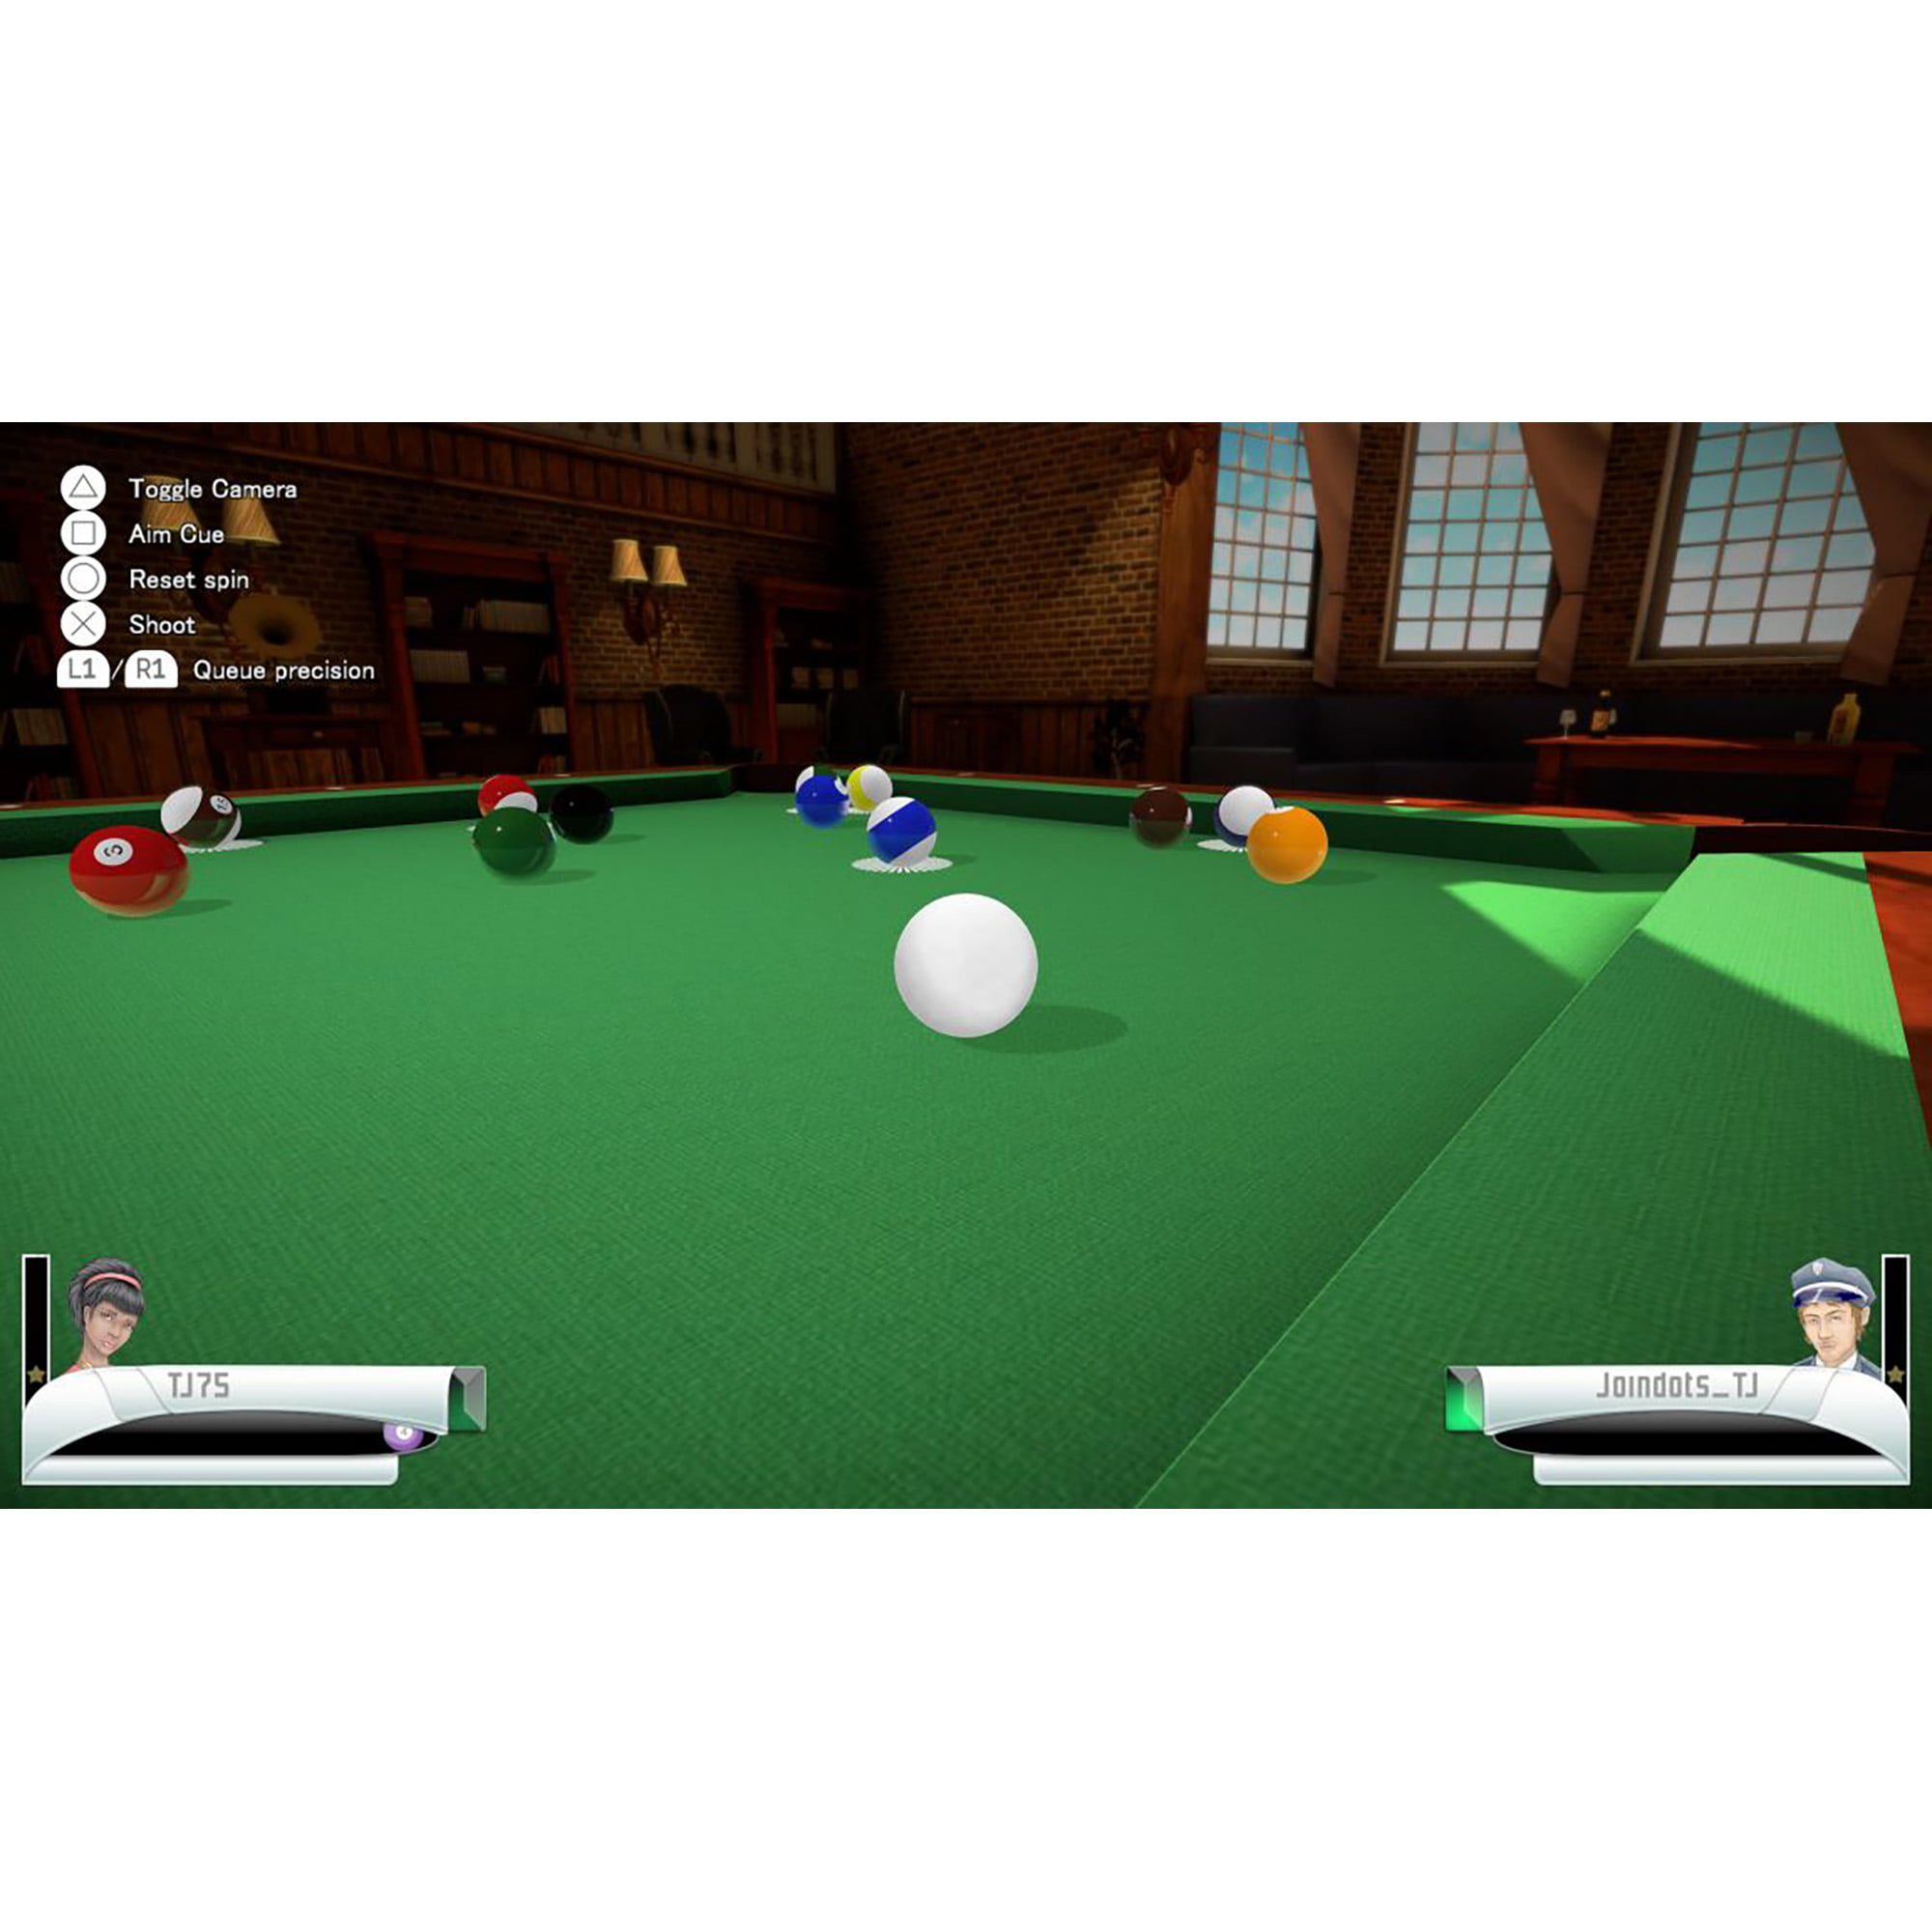 Pool Hot 2021 - Pool Games Free,Pool Table Games,Pool Party Games,Best 3D  Pool & Snooker Game,Offline Billiards Game For Kindle Fire,Real Pool Tour  Skillz Games,Pool Billiards Master Challenge Trainer::Appstore  for Android